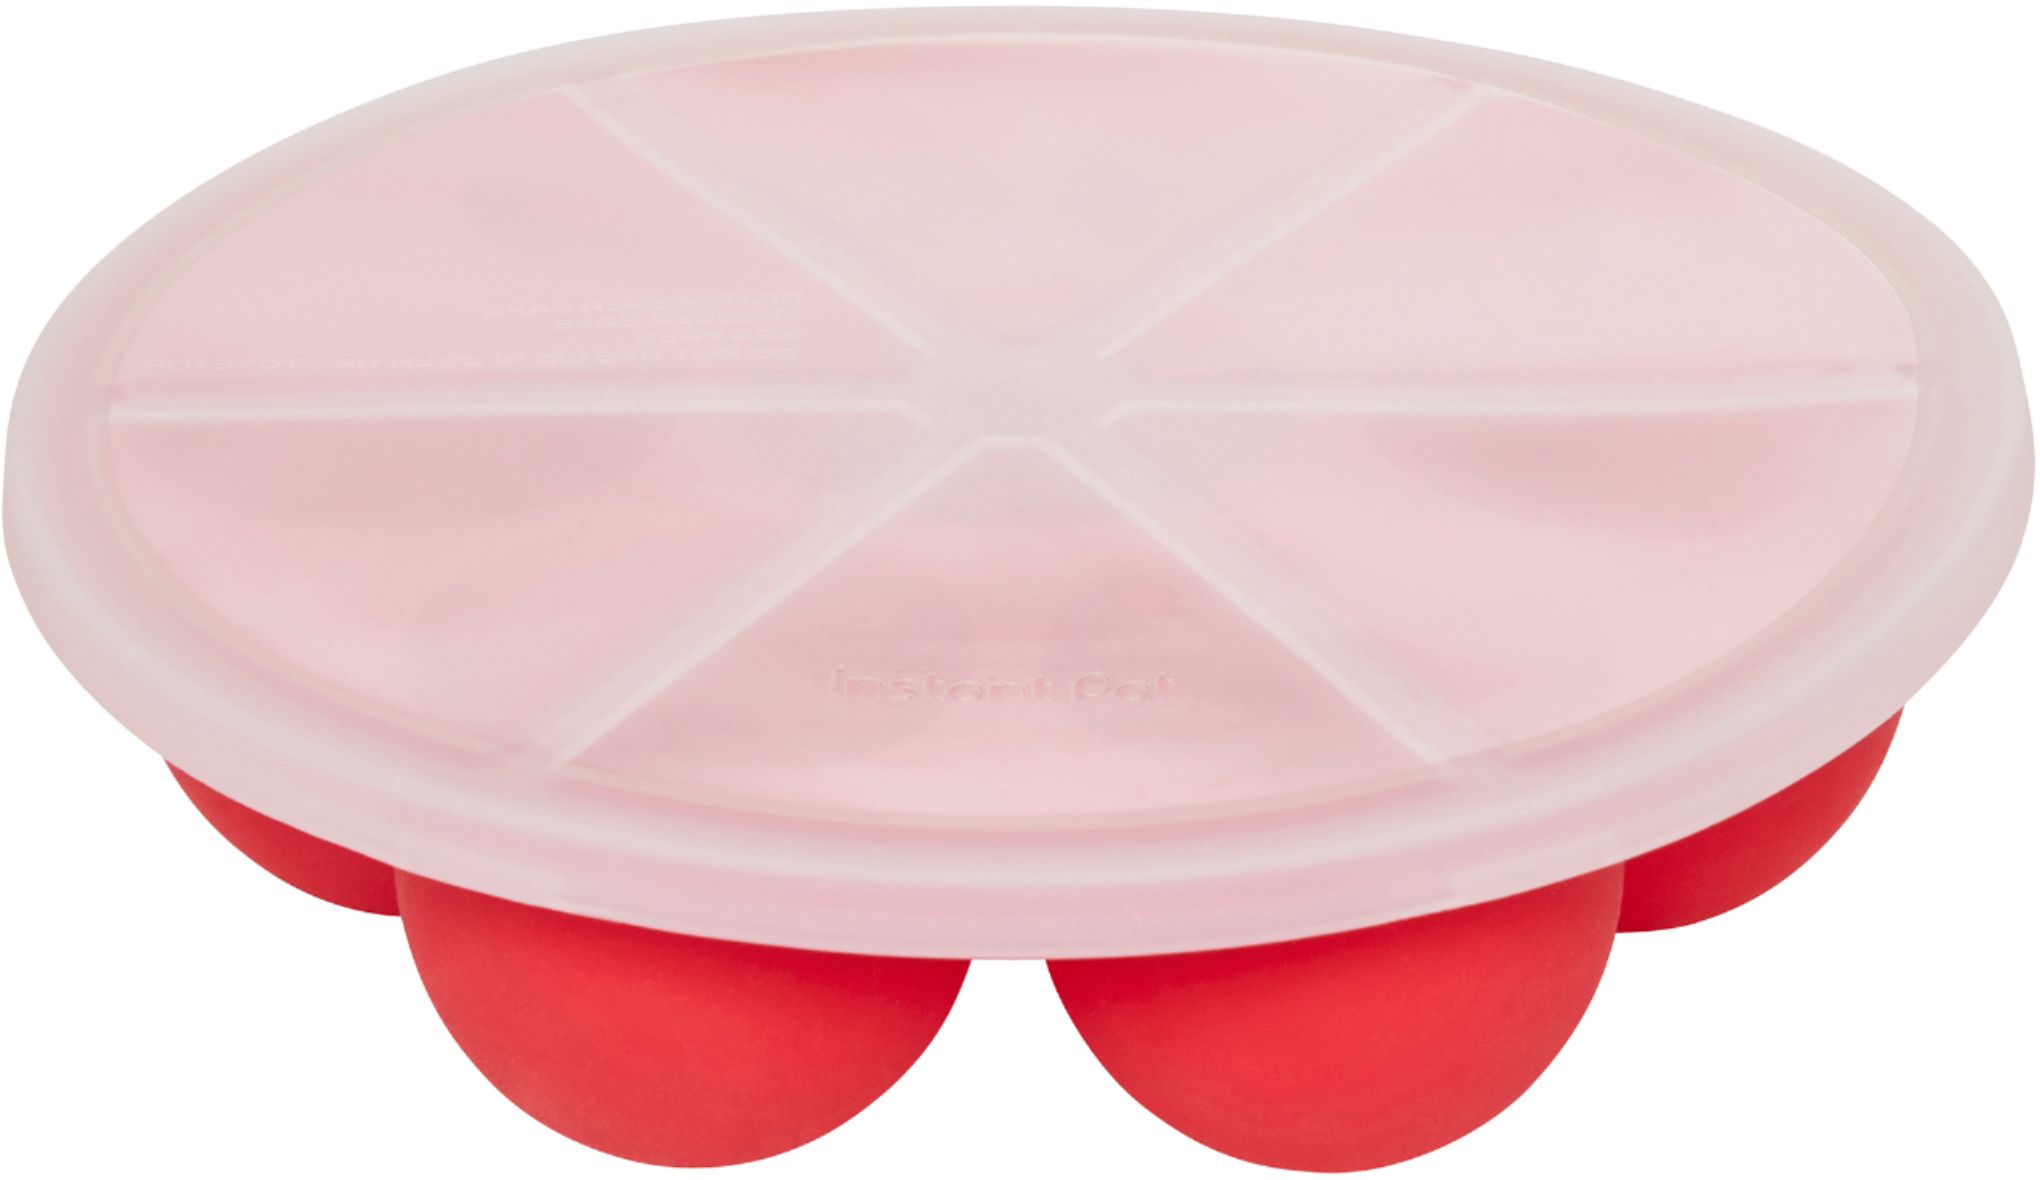 Instant Pot - 5252242 Instant Pot Official Silicone Egg Bites Pan with Lid,  Compatible with 6-quart and 8-quart cookers, Red